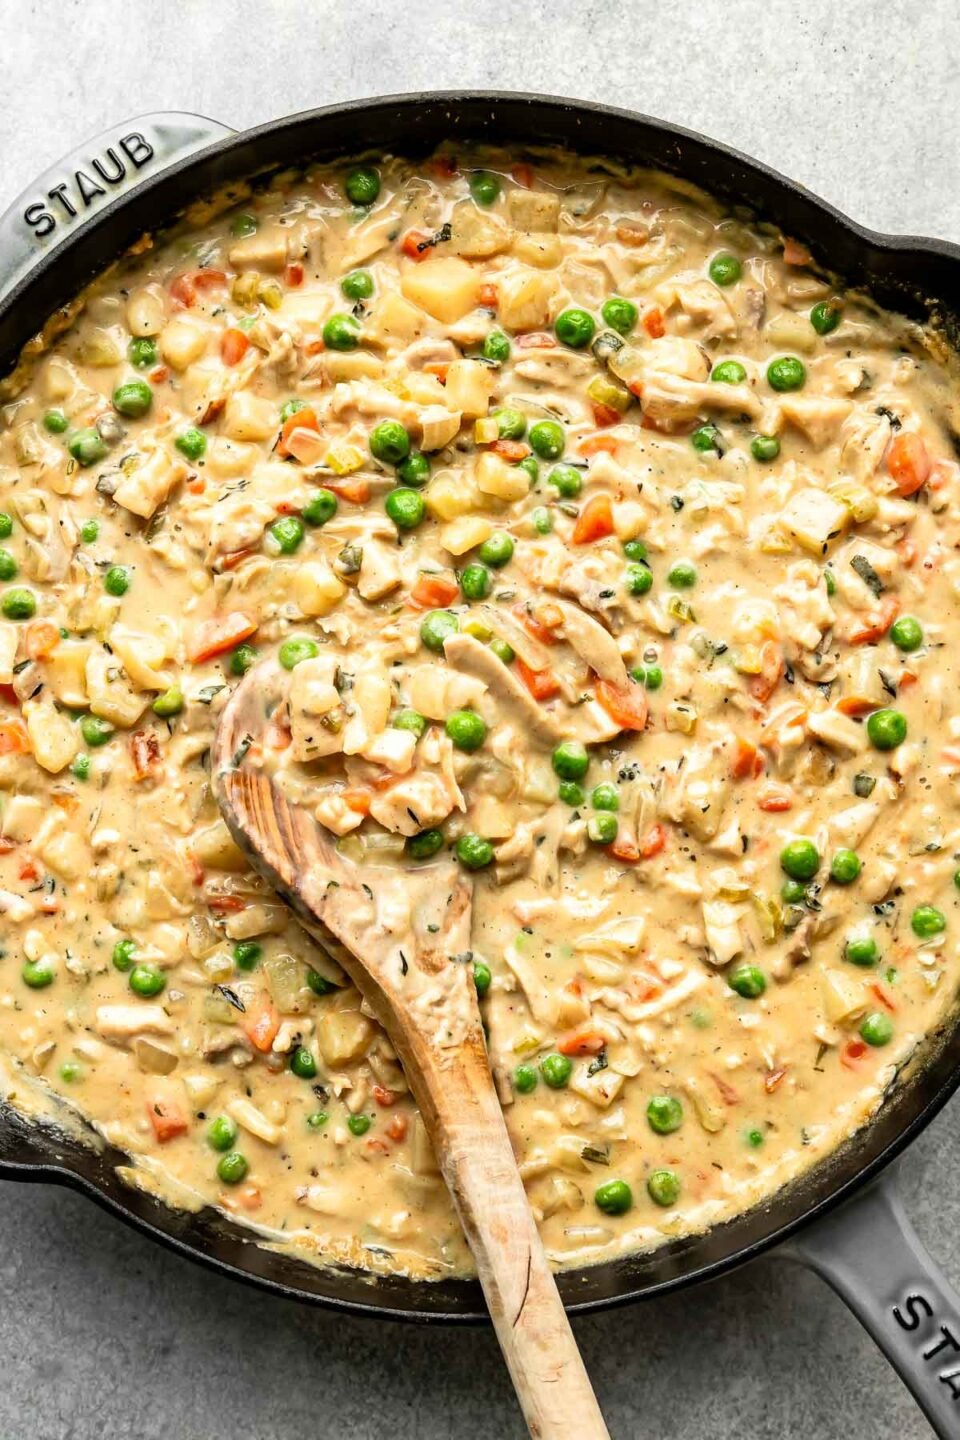 An overhead shot of finished pot pie filling in a black skillet with a wooden spoon atop a grey textured surface.